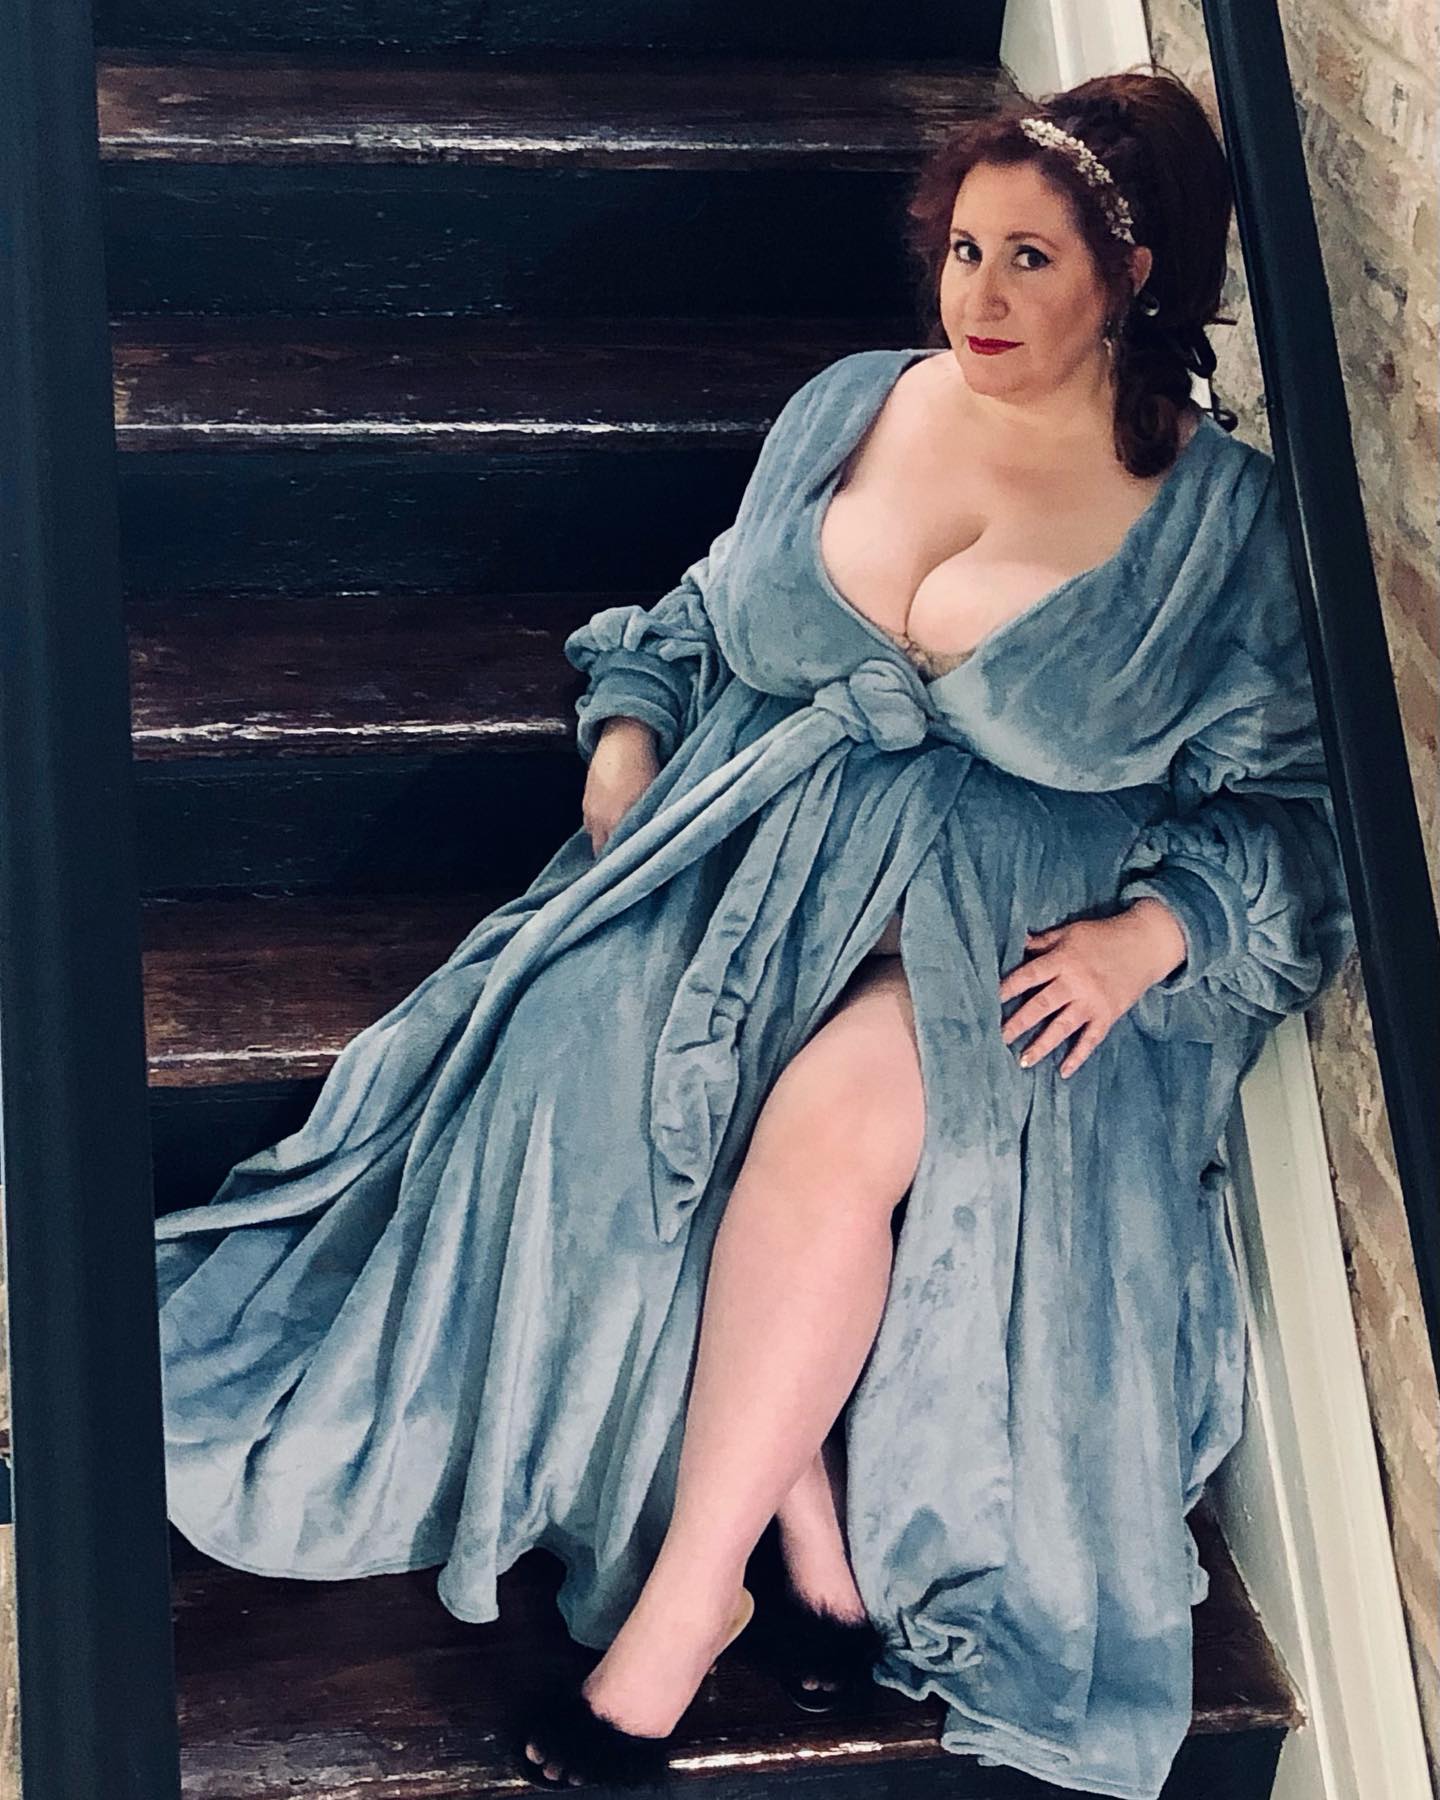 I absolutely love how this @catherinedlish robe plays with the natural light with it’s soft blue and incredibly soft texture. You can’t help feeling luxurious in it! 

Location @woodfordhotel 
Robe @catherinedlish 
Hair band @babeyond_official 
Photographer is my kid 

#plussizefashion #vintagestyle #plussizemodel #plusizepinup #vintagefashion #bodaciousbigmamared #catherinedlish #woodfordhotel